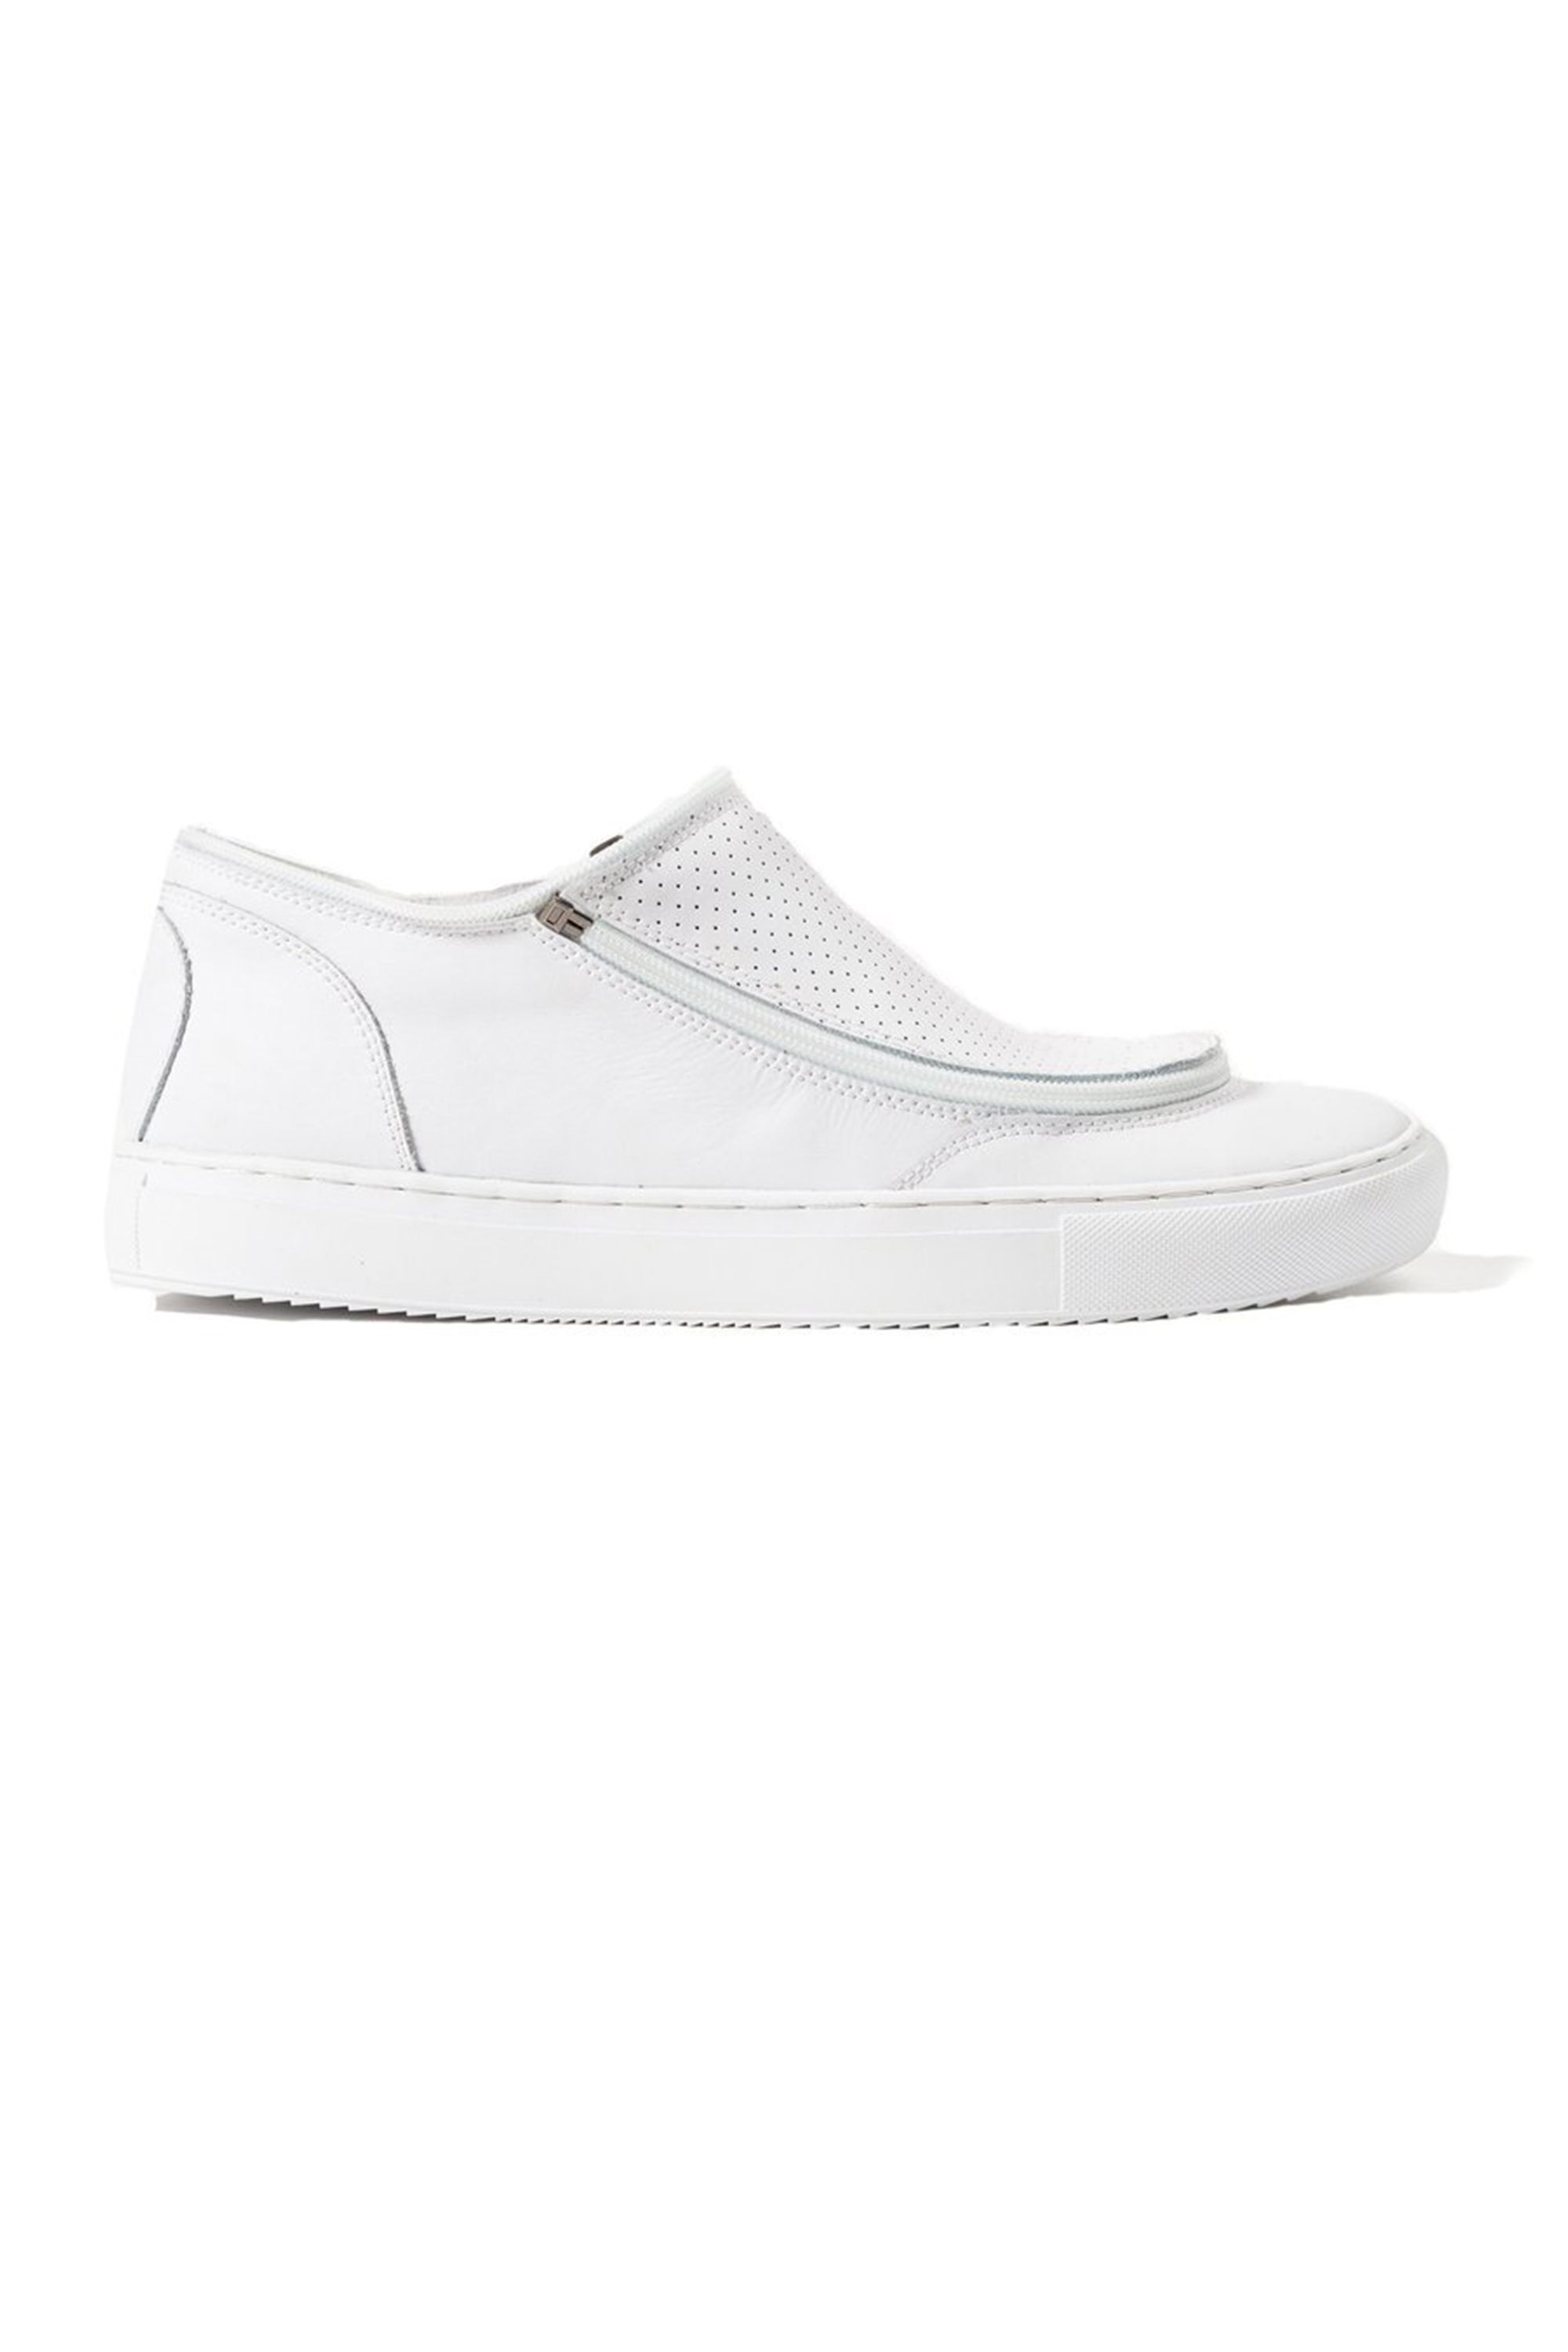 leather white slip on sneakers